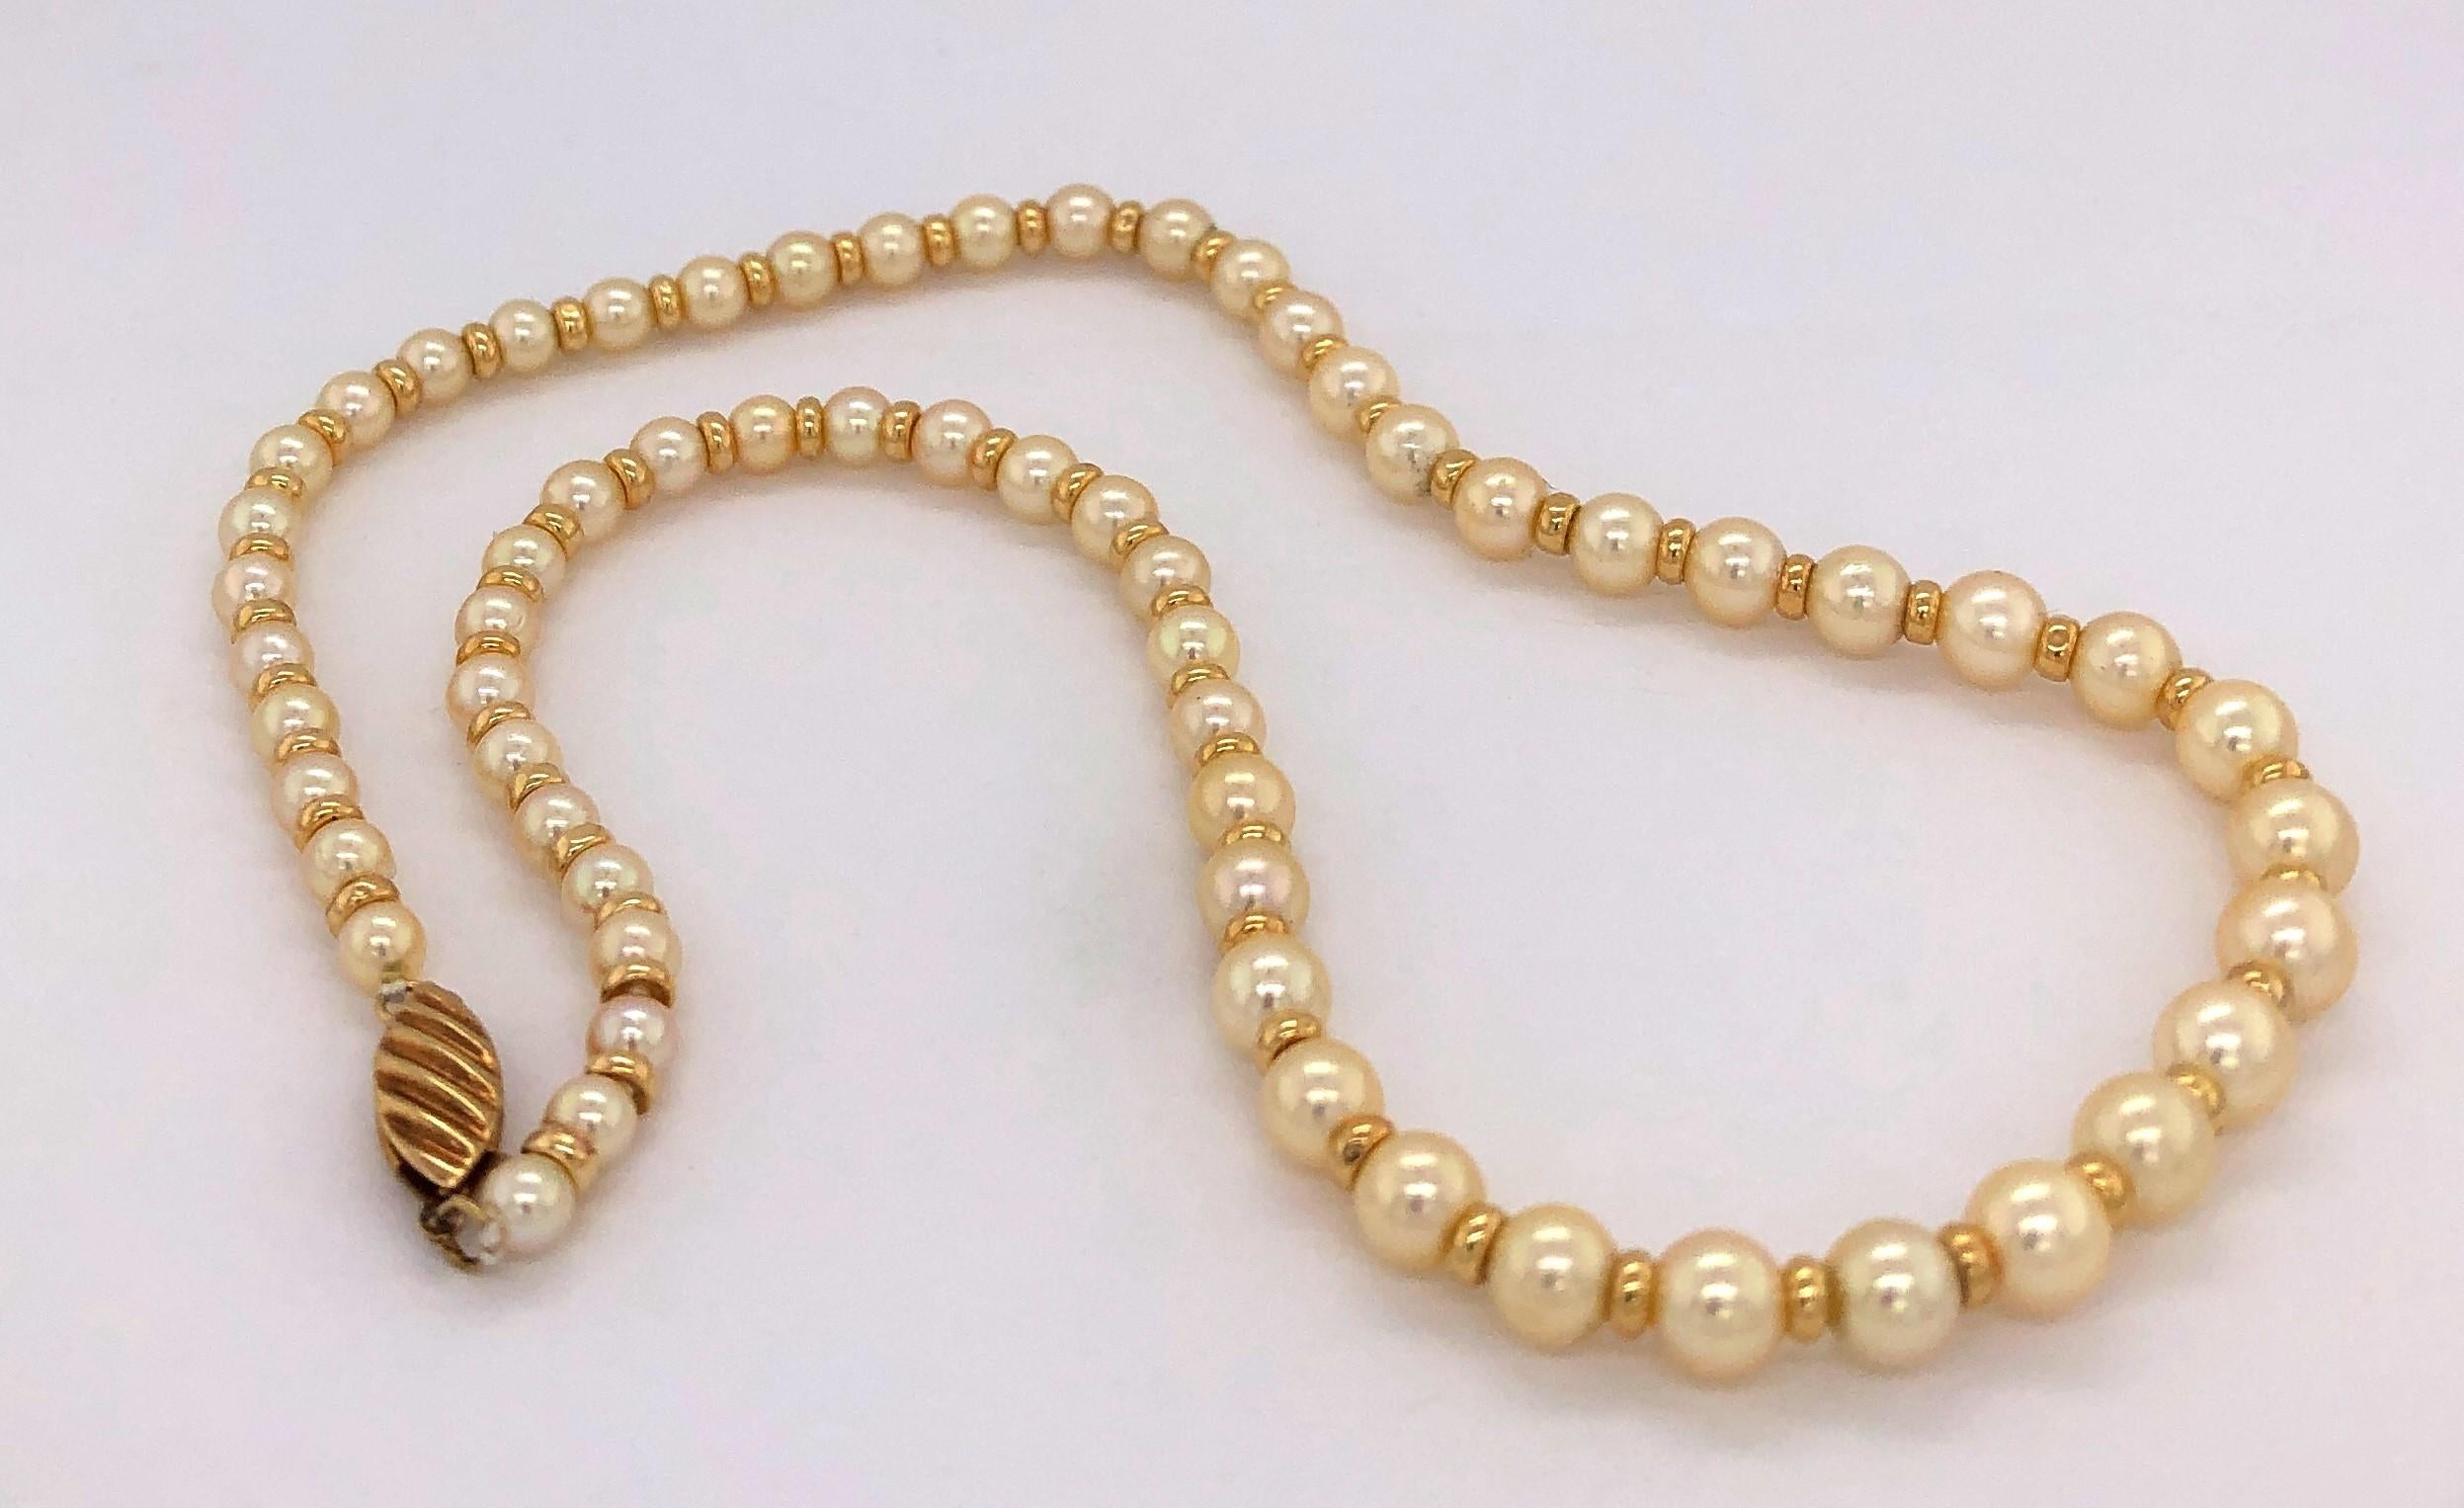 Understated elegance describes this fourteen inch necklace of graduated quality Akoya Pearls ranging from 3.5 mm to 5.5 mm accented with fourteen carat yellow gold beads hand strung between each pearl. The strand is neatly finished with a decorative